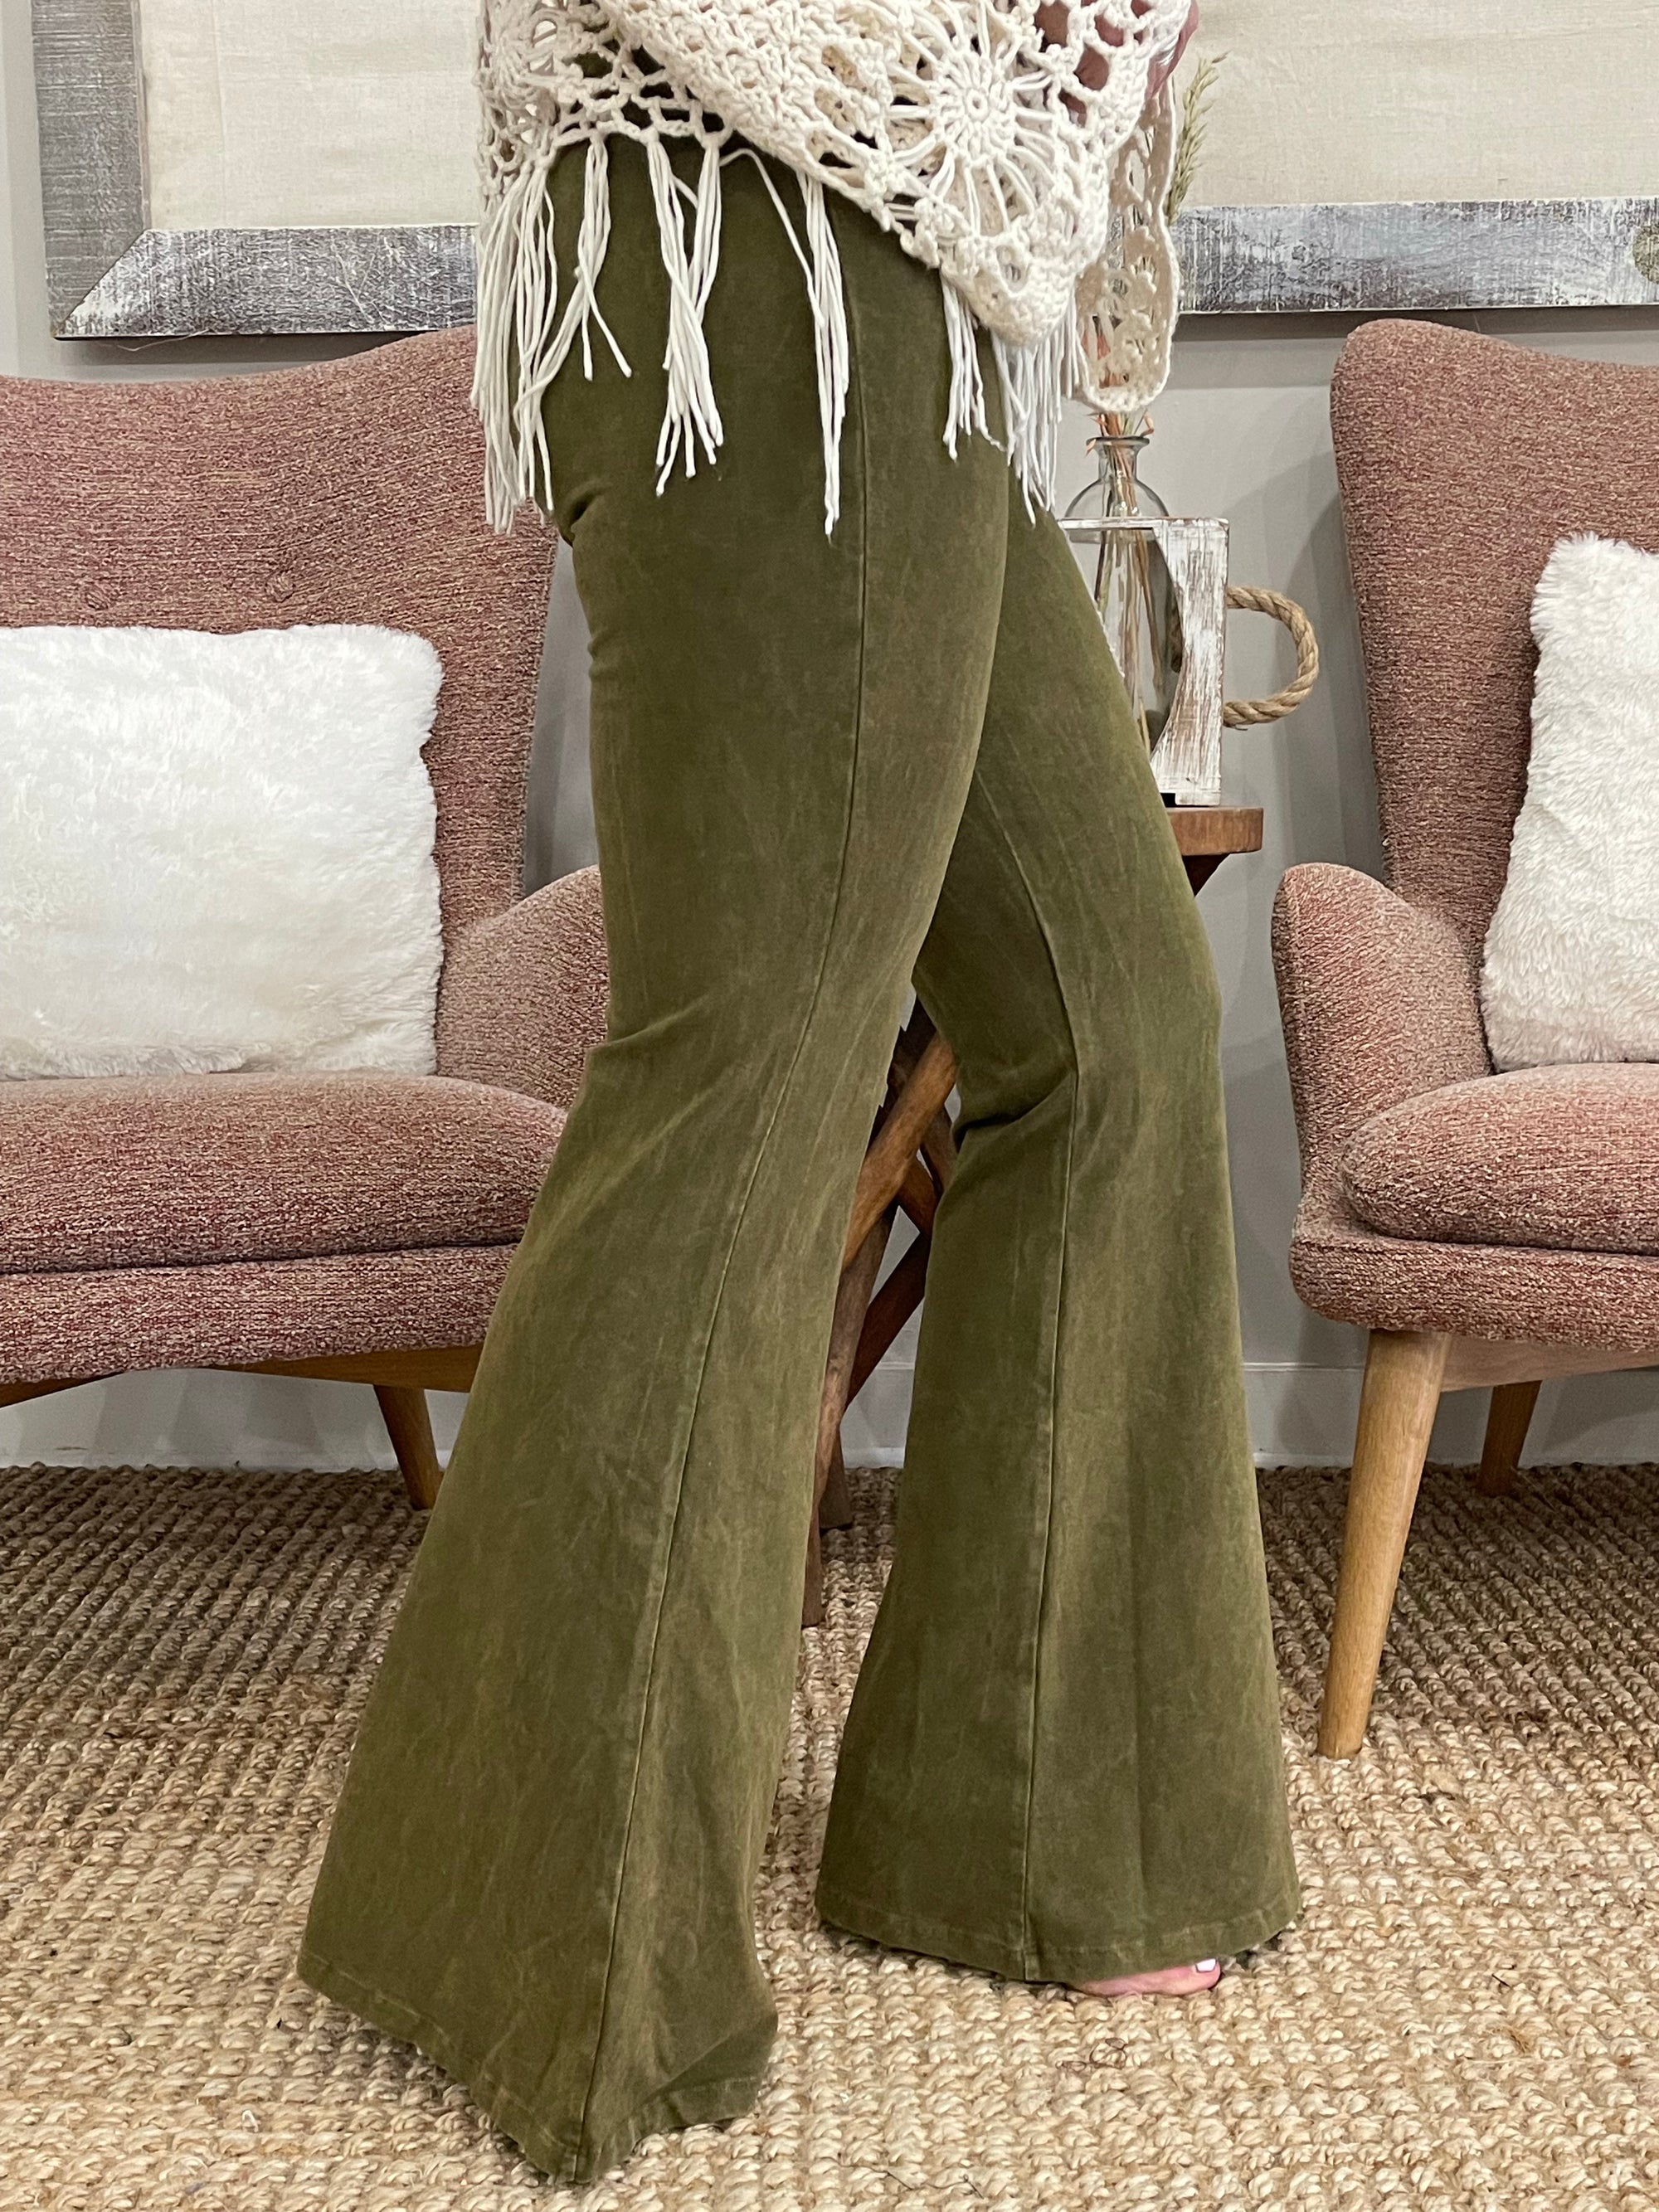 Mineral Wash Bell Bottom Pants in Pale Olive- The Rustic Rack Boutique